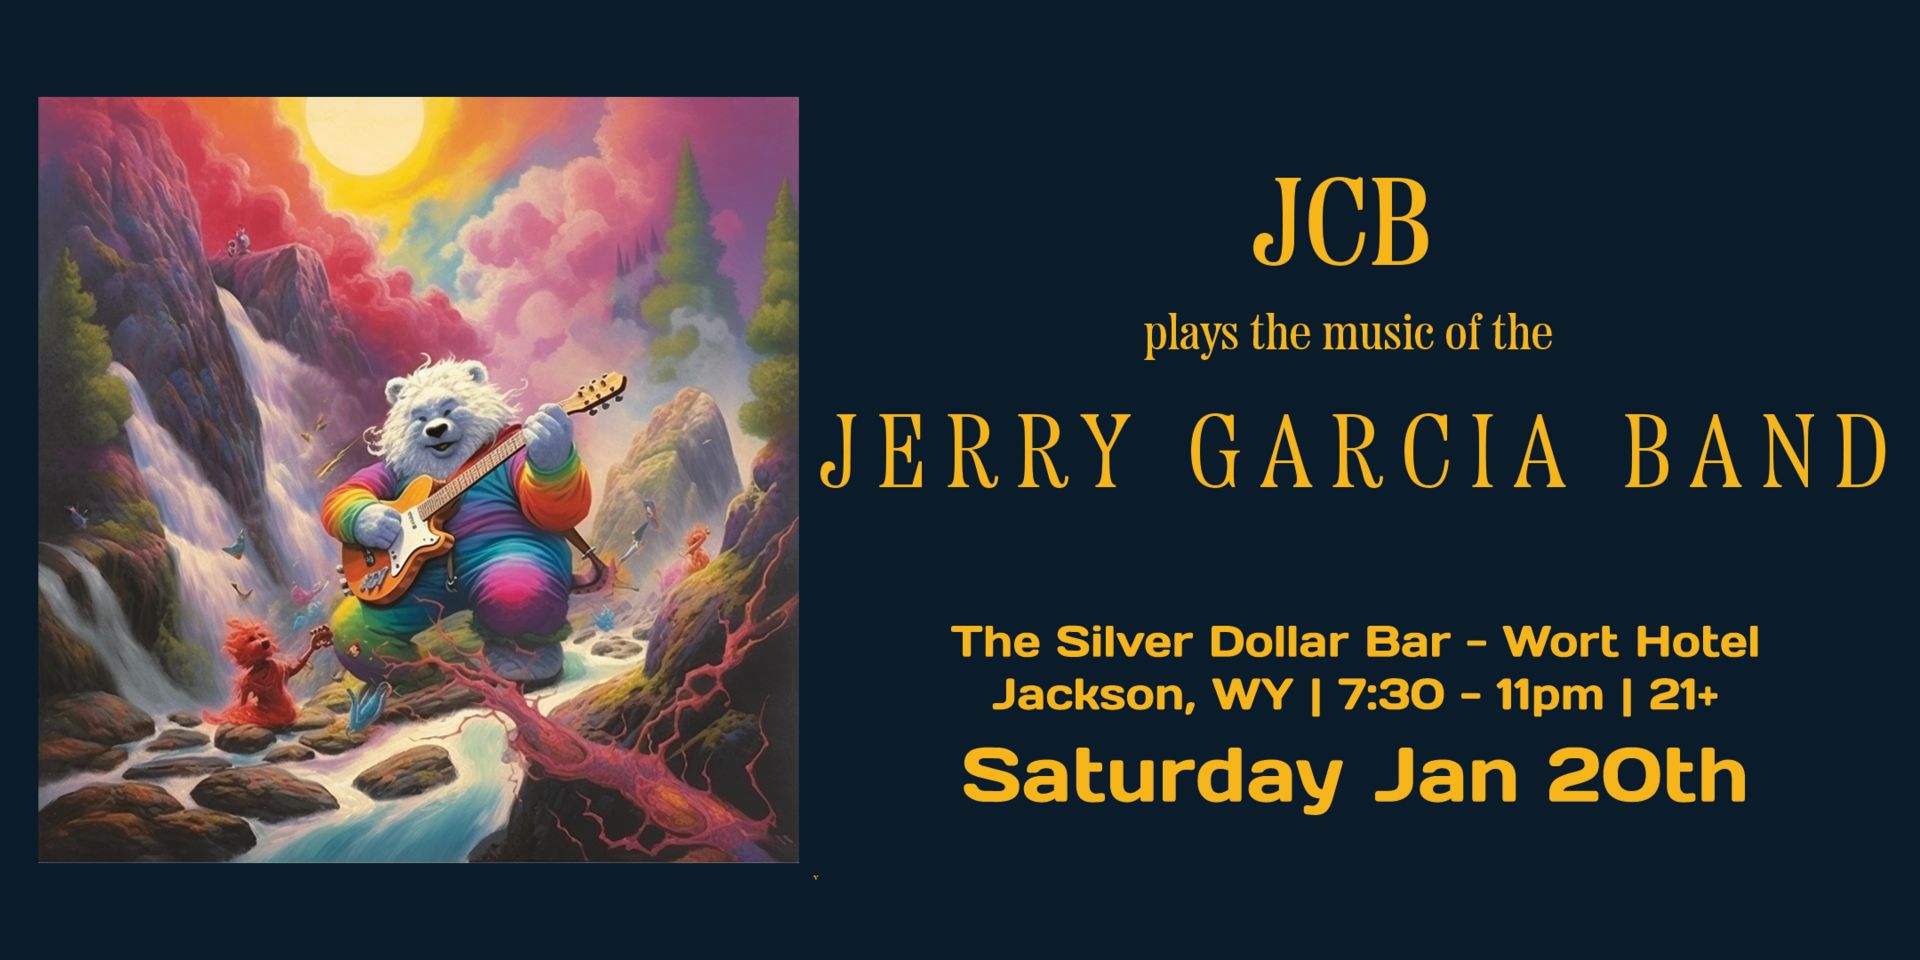 JCB plays the music of the Jerry Garcia Band at the Wort Saturday 1/20, Jackson, Wyoming, United States